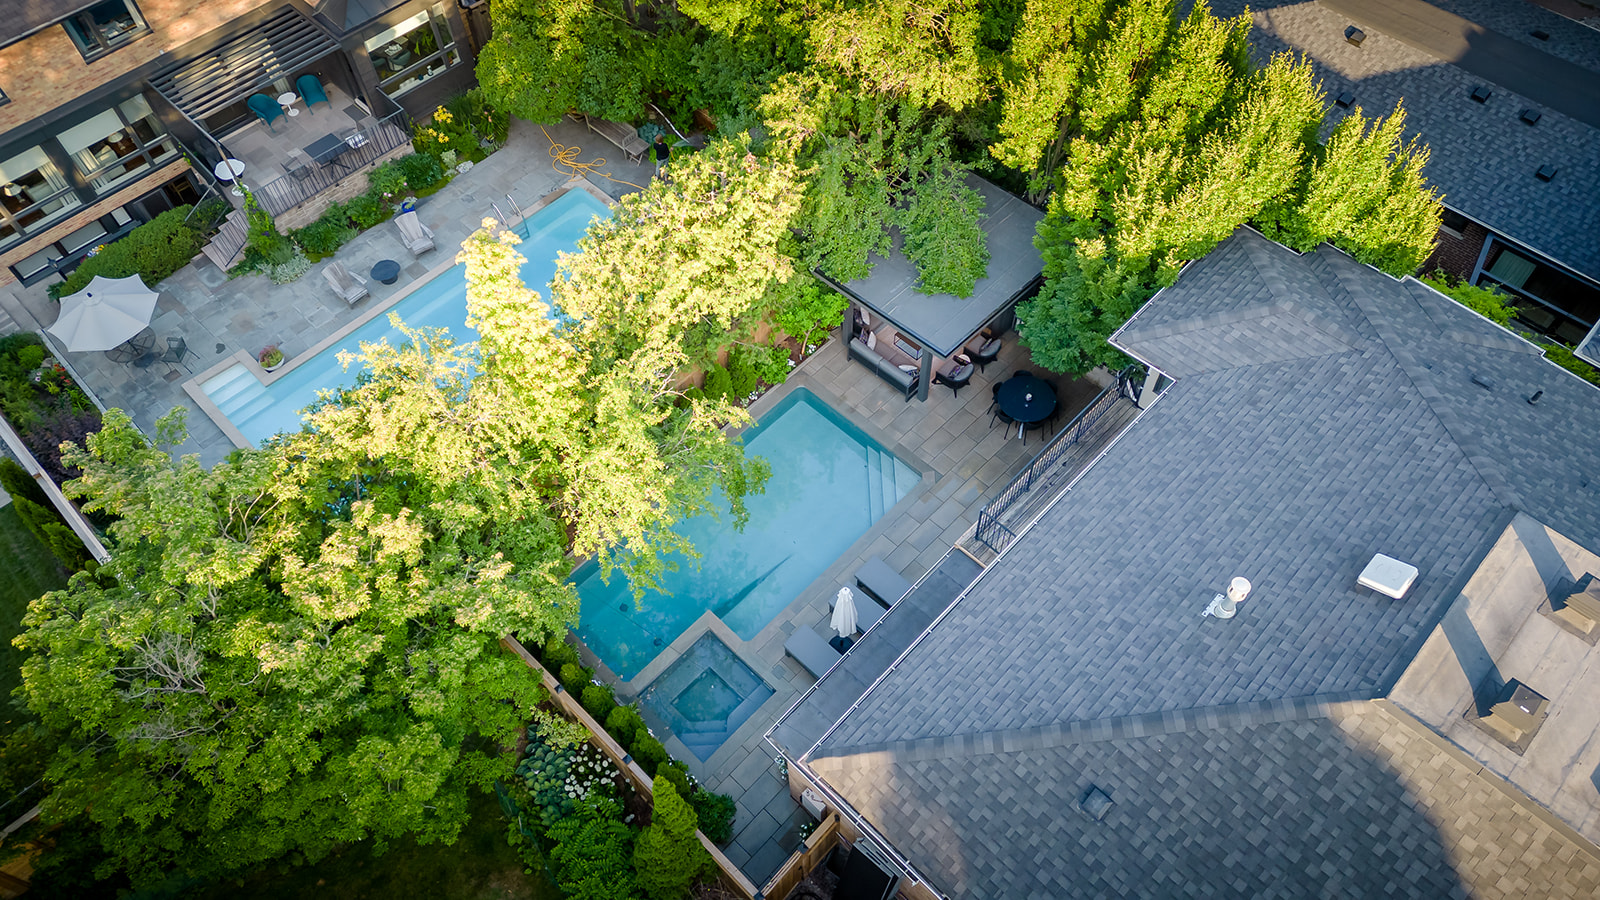 A drone-shot of the backyard with an inground pool.